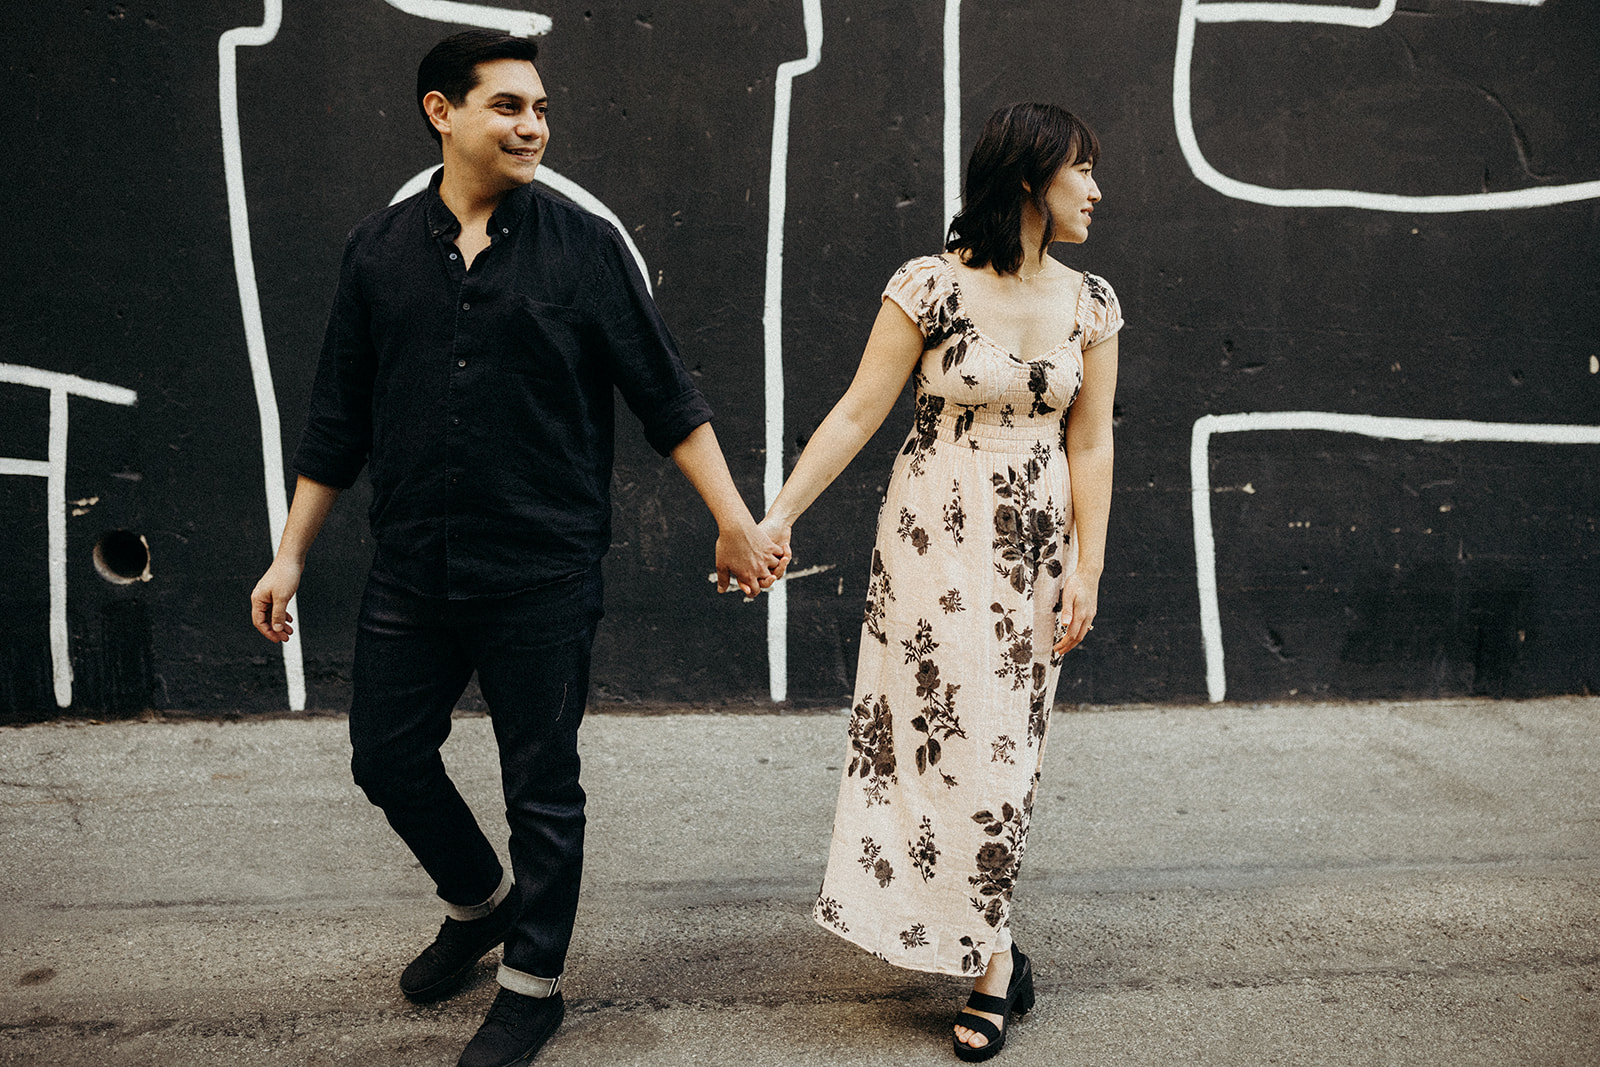 natural engagement photos of a sweet couple by Joe+Kathrina photography